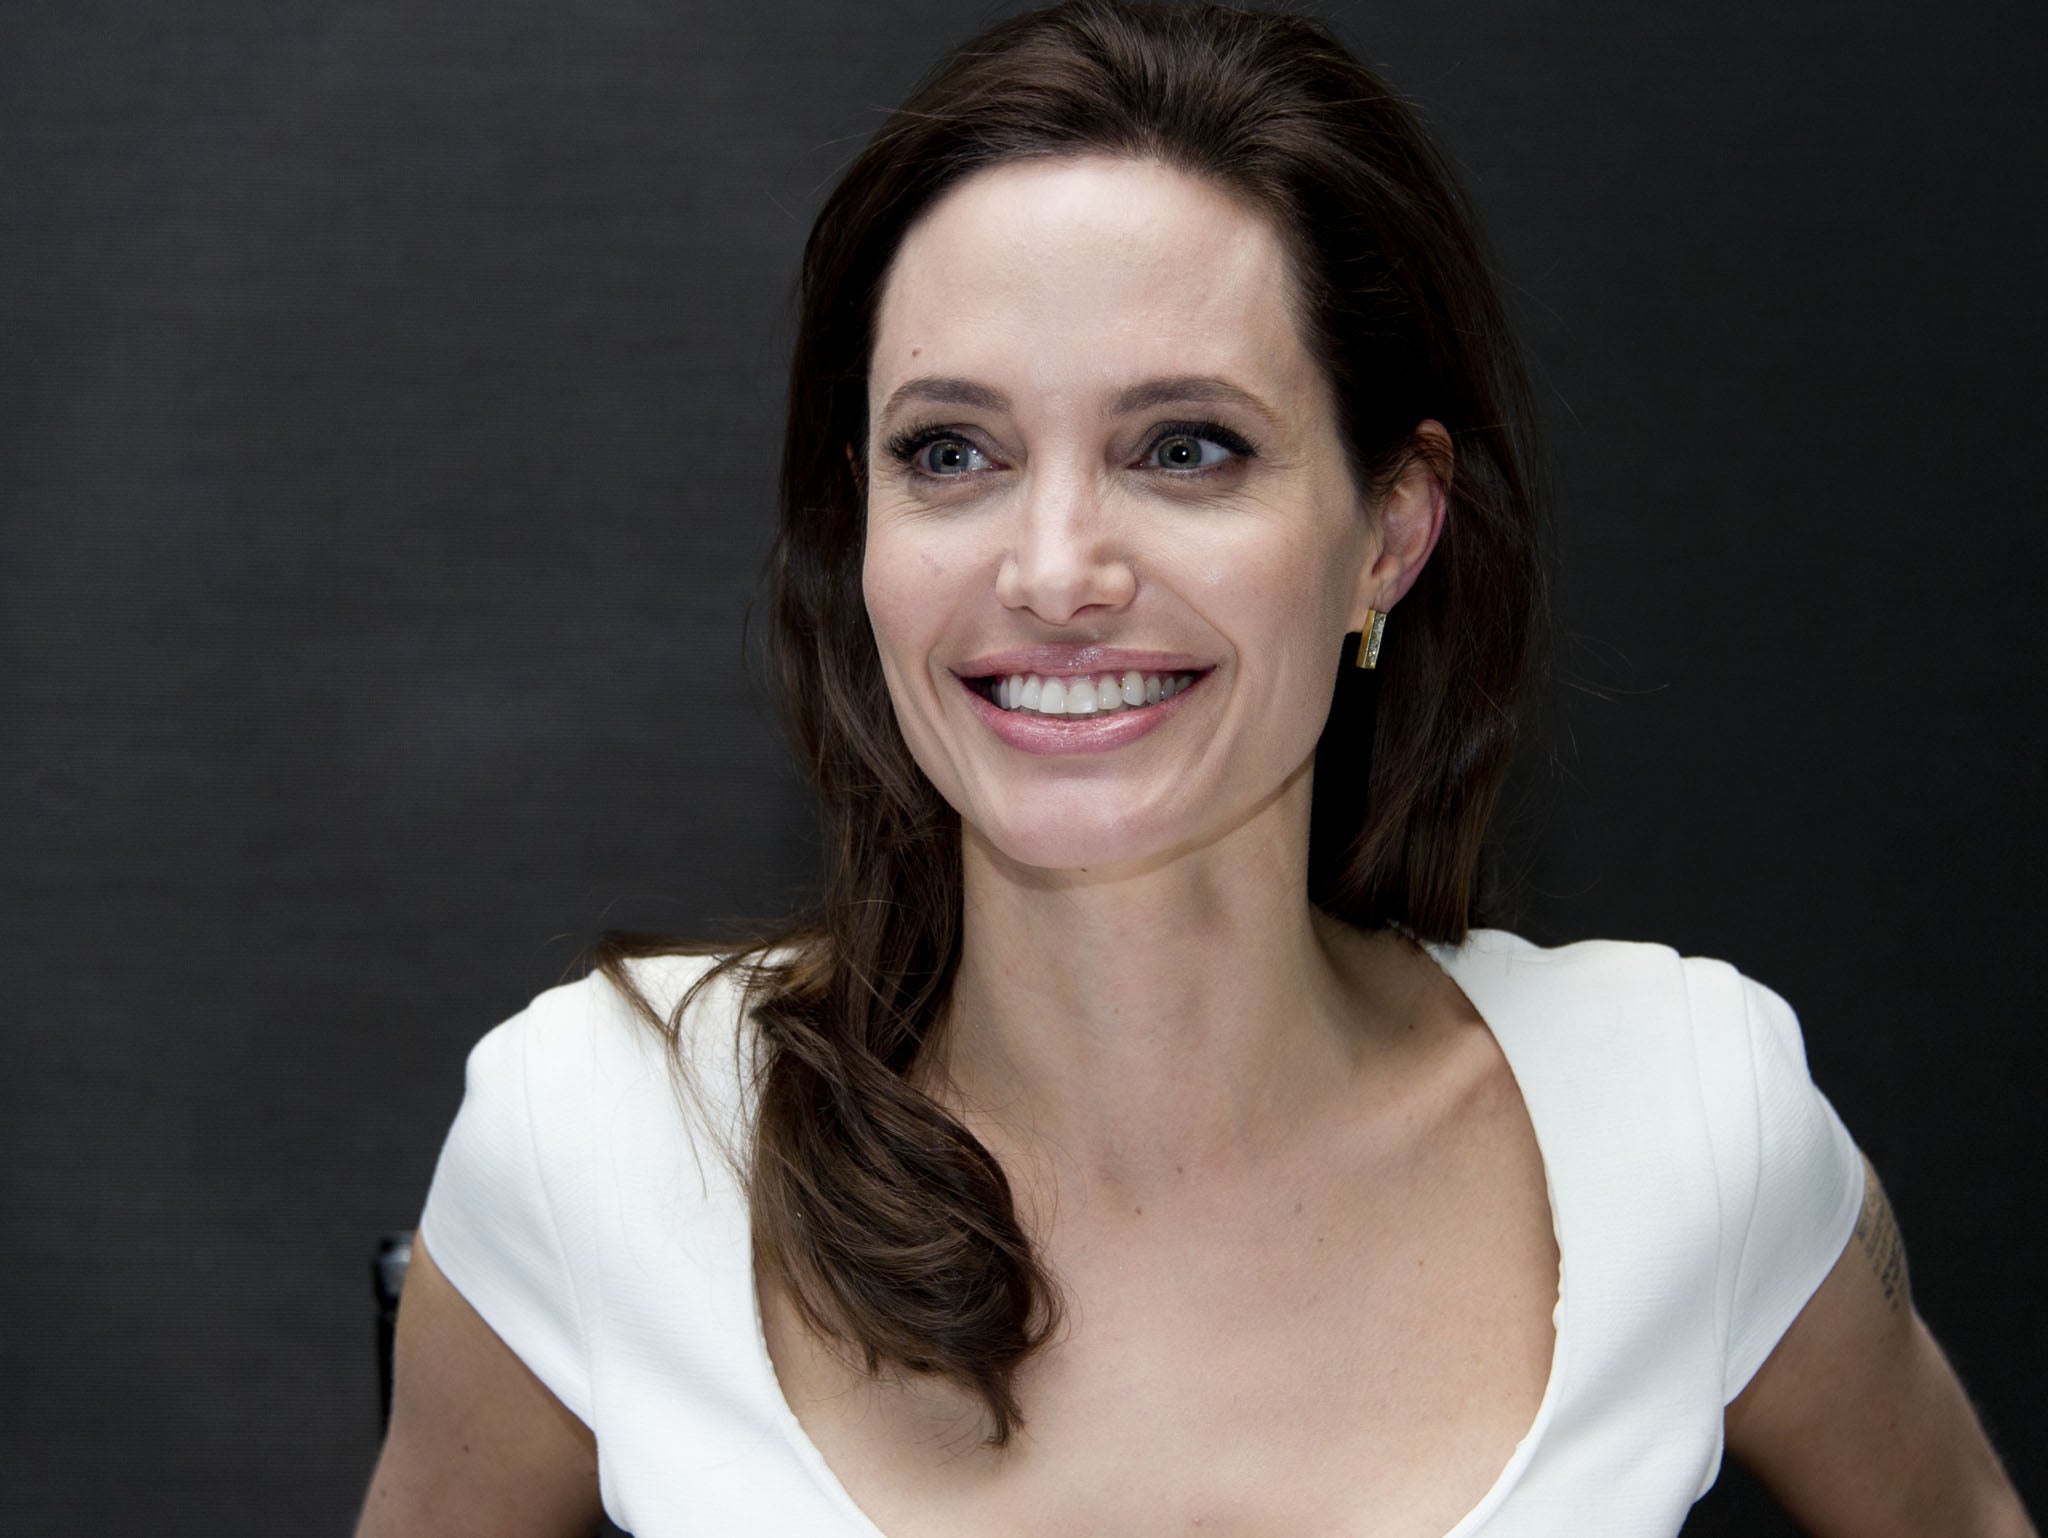 The father Tim Alexander said the twins did not realise Jolie was a celebrity at the time